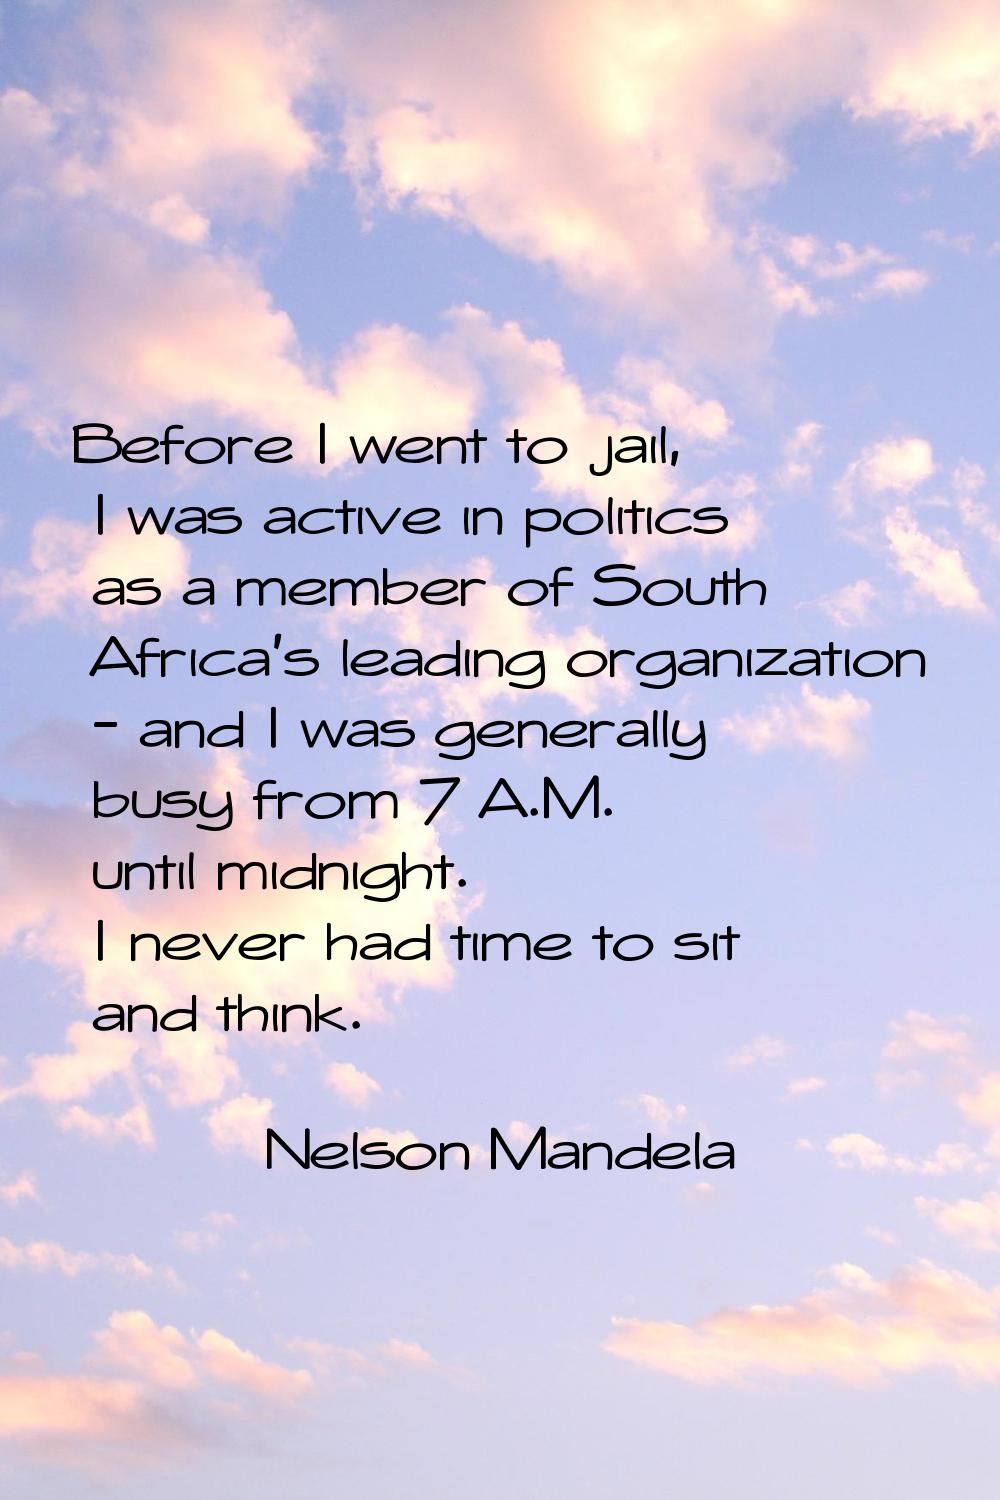 Before I went to jail, I was active in politics as a member of South Africa's leading organization 